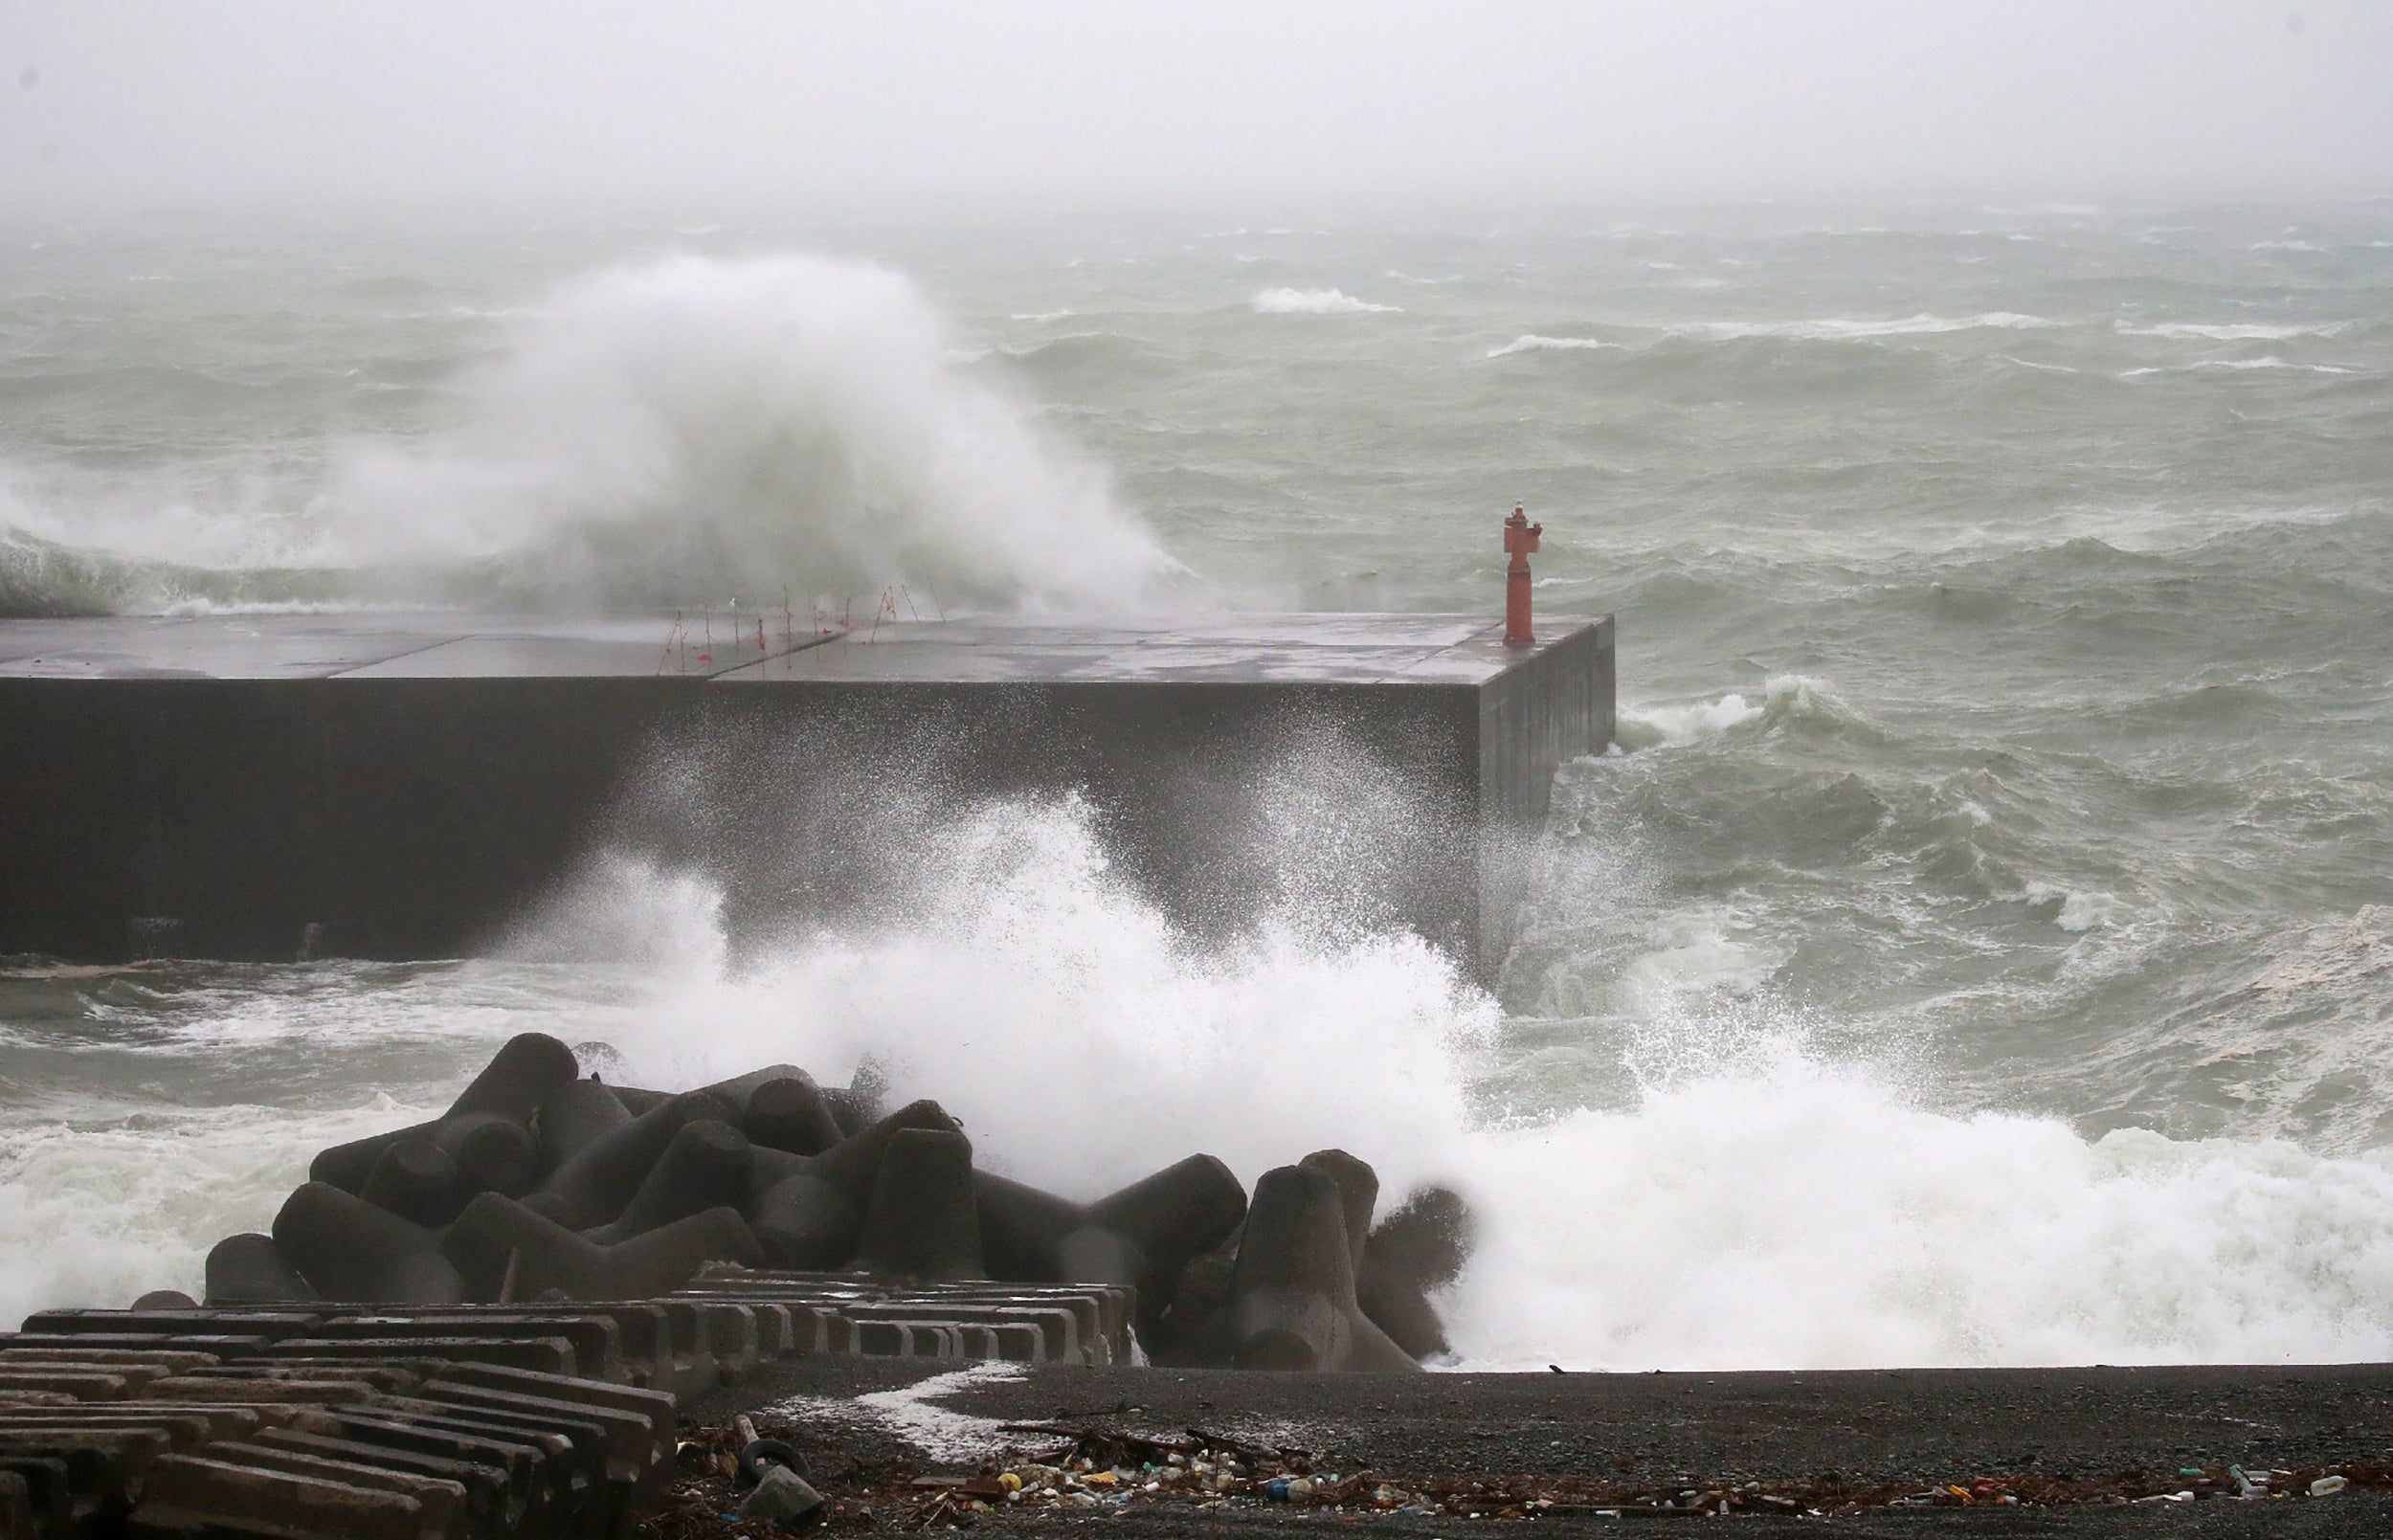 Large waves are seen at the port in Kumano city, Mie prefecture